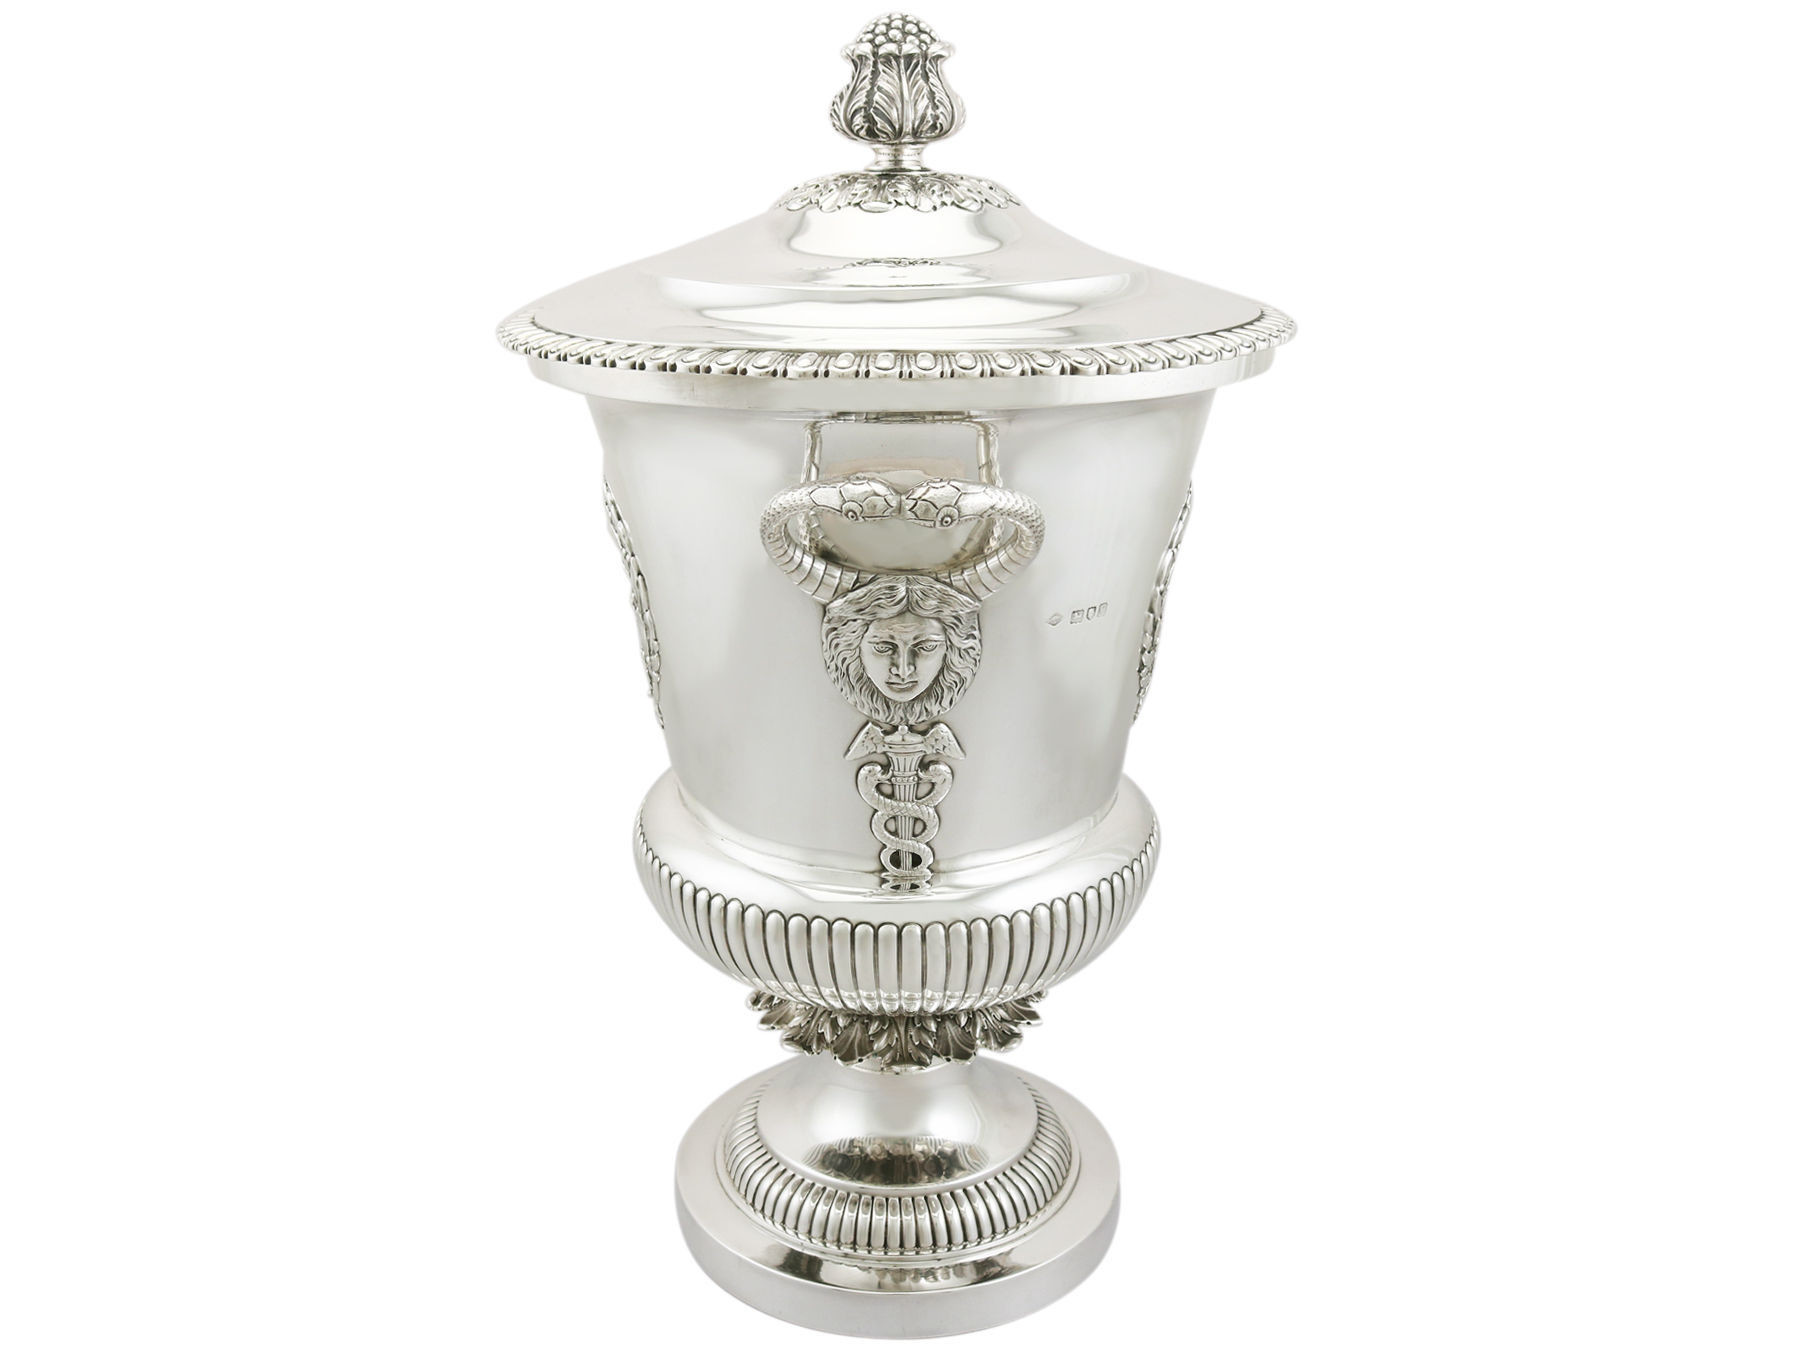 21 Recommended Sterling Silver Flower Vase 2024 free download sterling silver flower vase of antique edwardian sterling silver presentation cup and cover 1909 for antique edwardian sterling silver presentation cup and cover